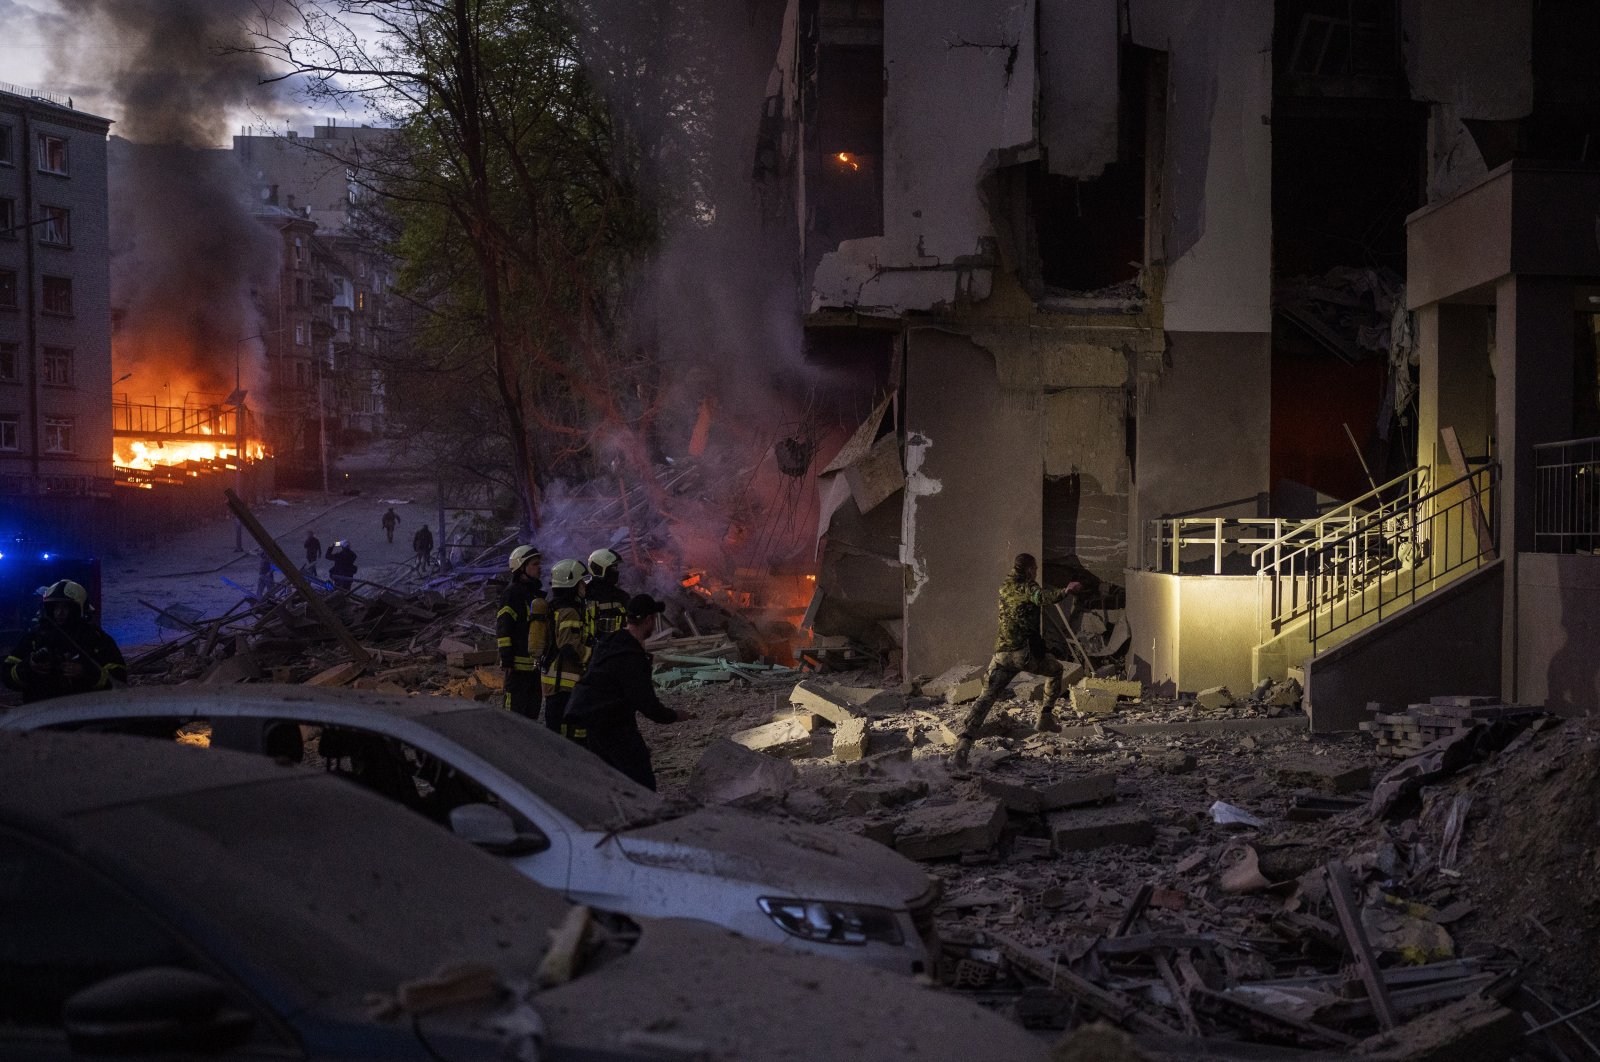 Emergency services respond in the area following an explosion in Kyiv, Ukraine on Thursday, April 28, 2022. (AP Photo)